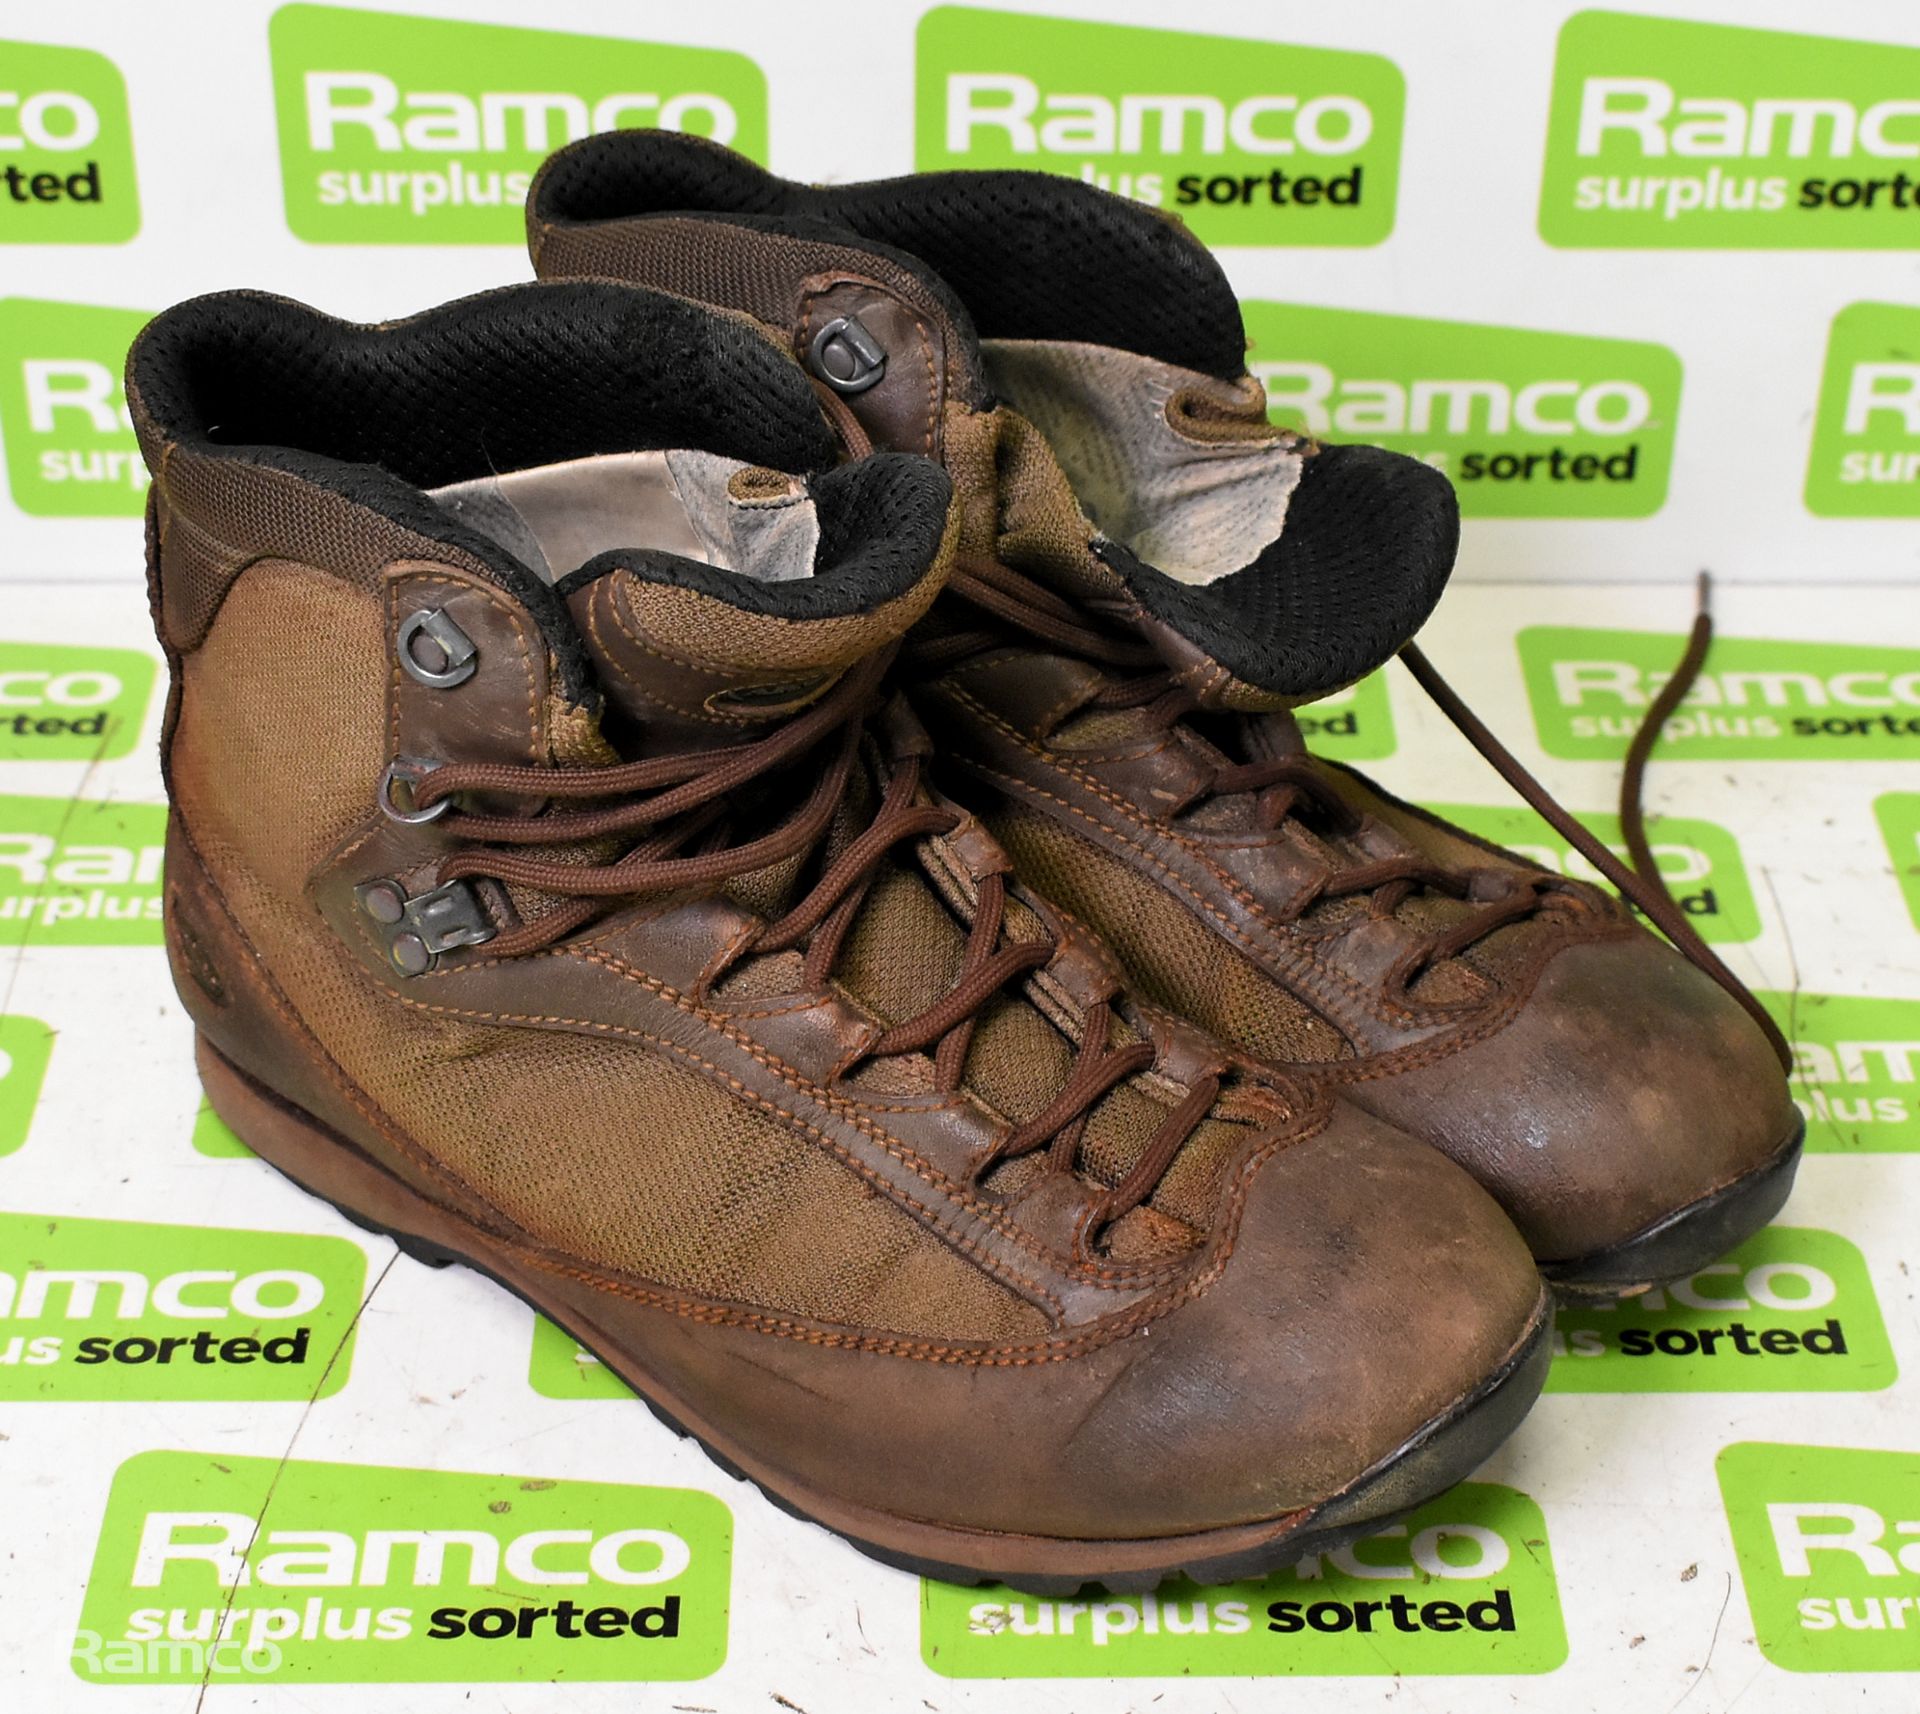 50x pairs of Various boots including Magnum, Iturri & YDS - mixed grades and sizes - Image 6 of 22